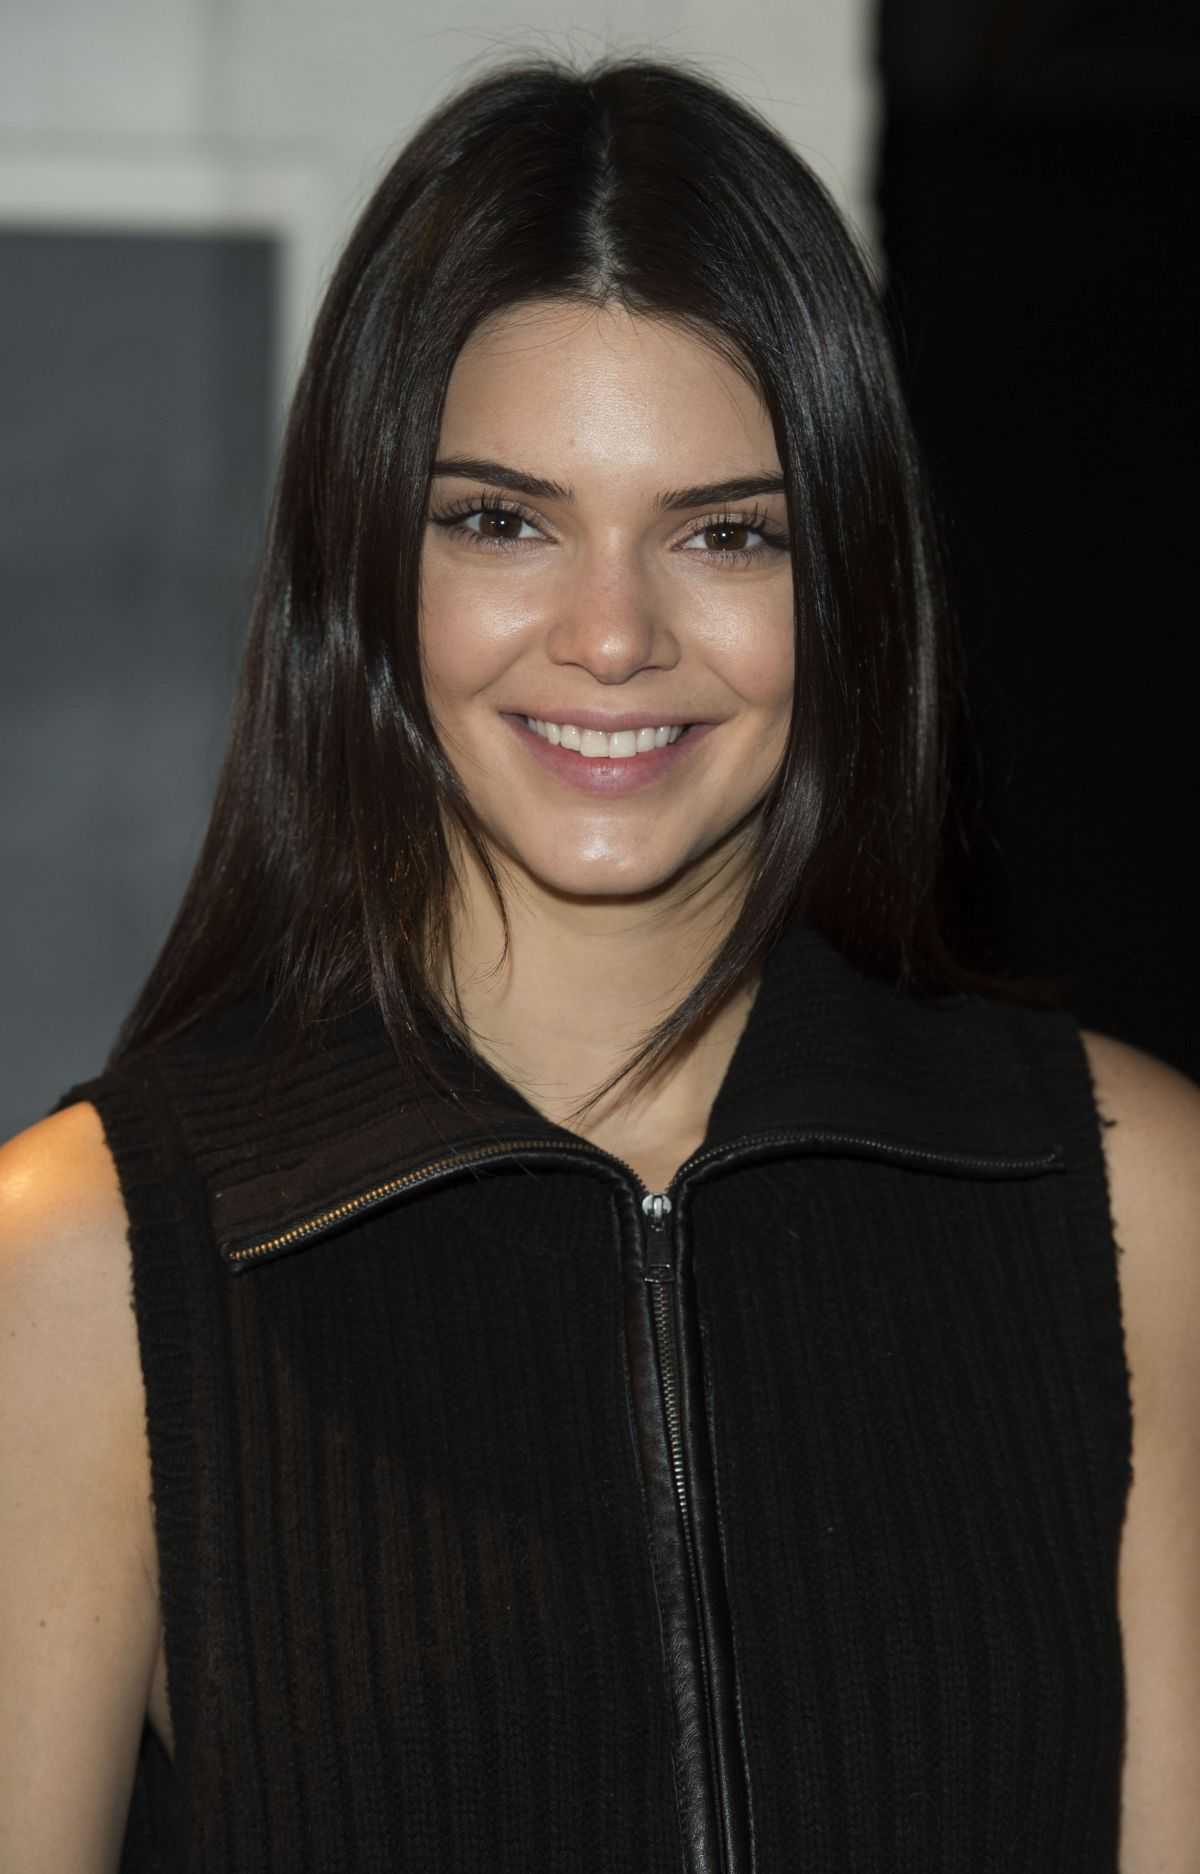 General photo of Kendall Jenner